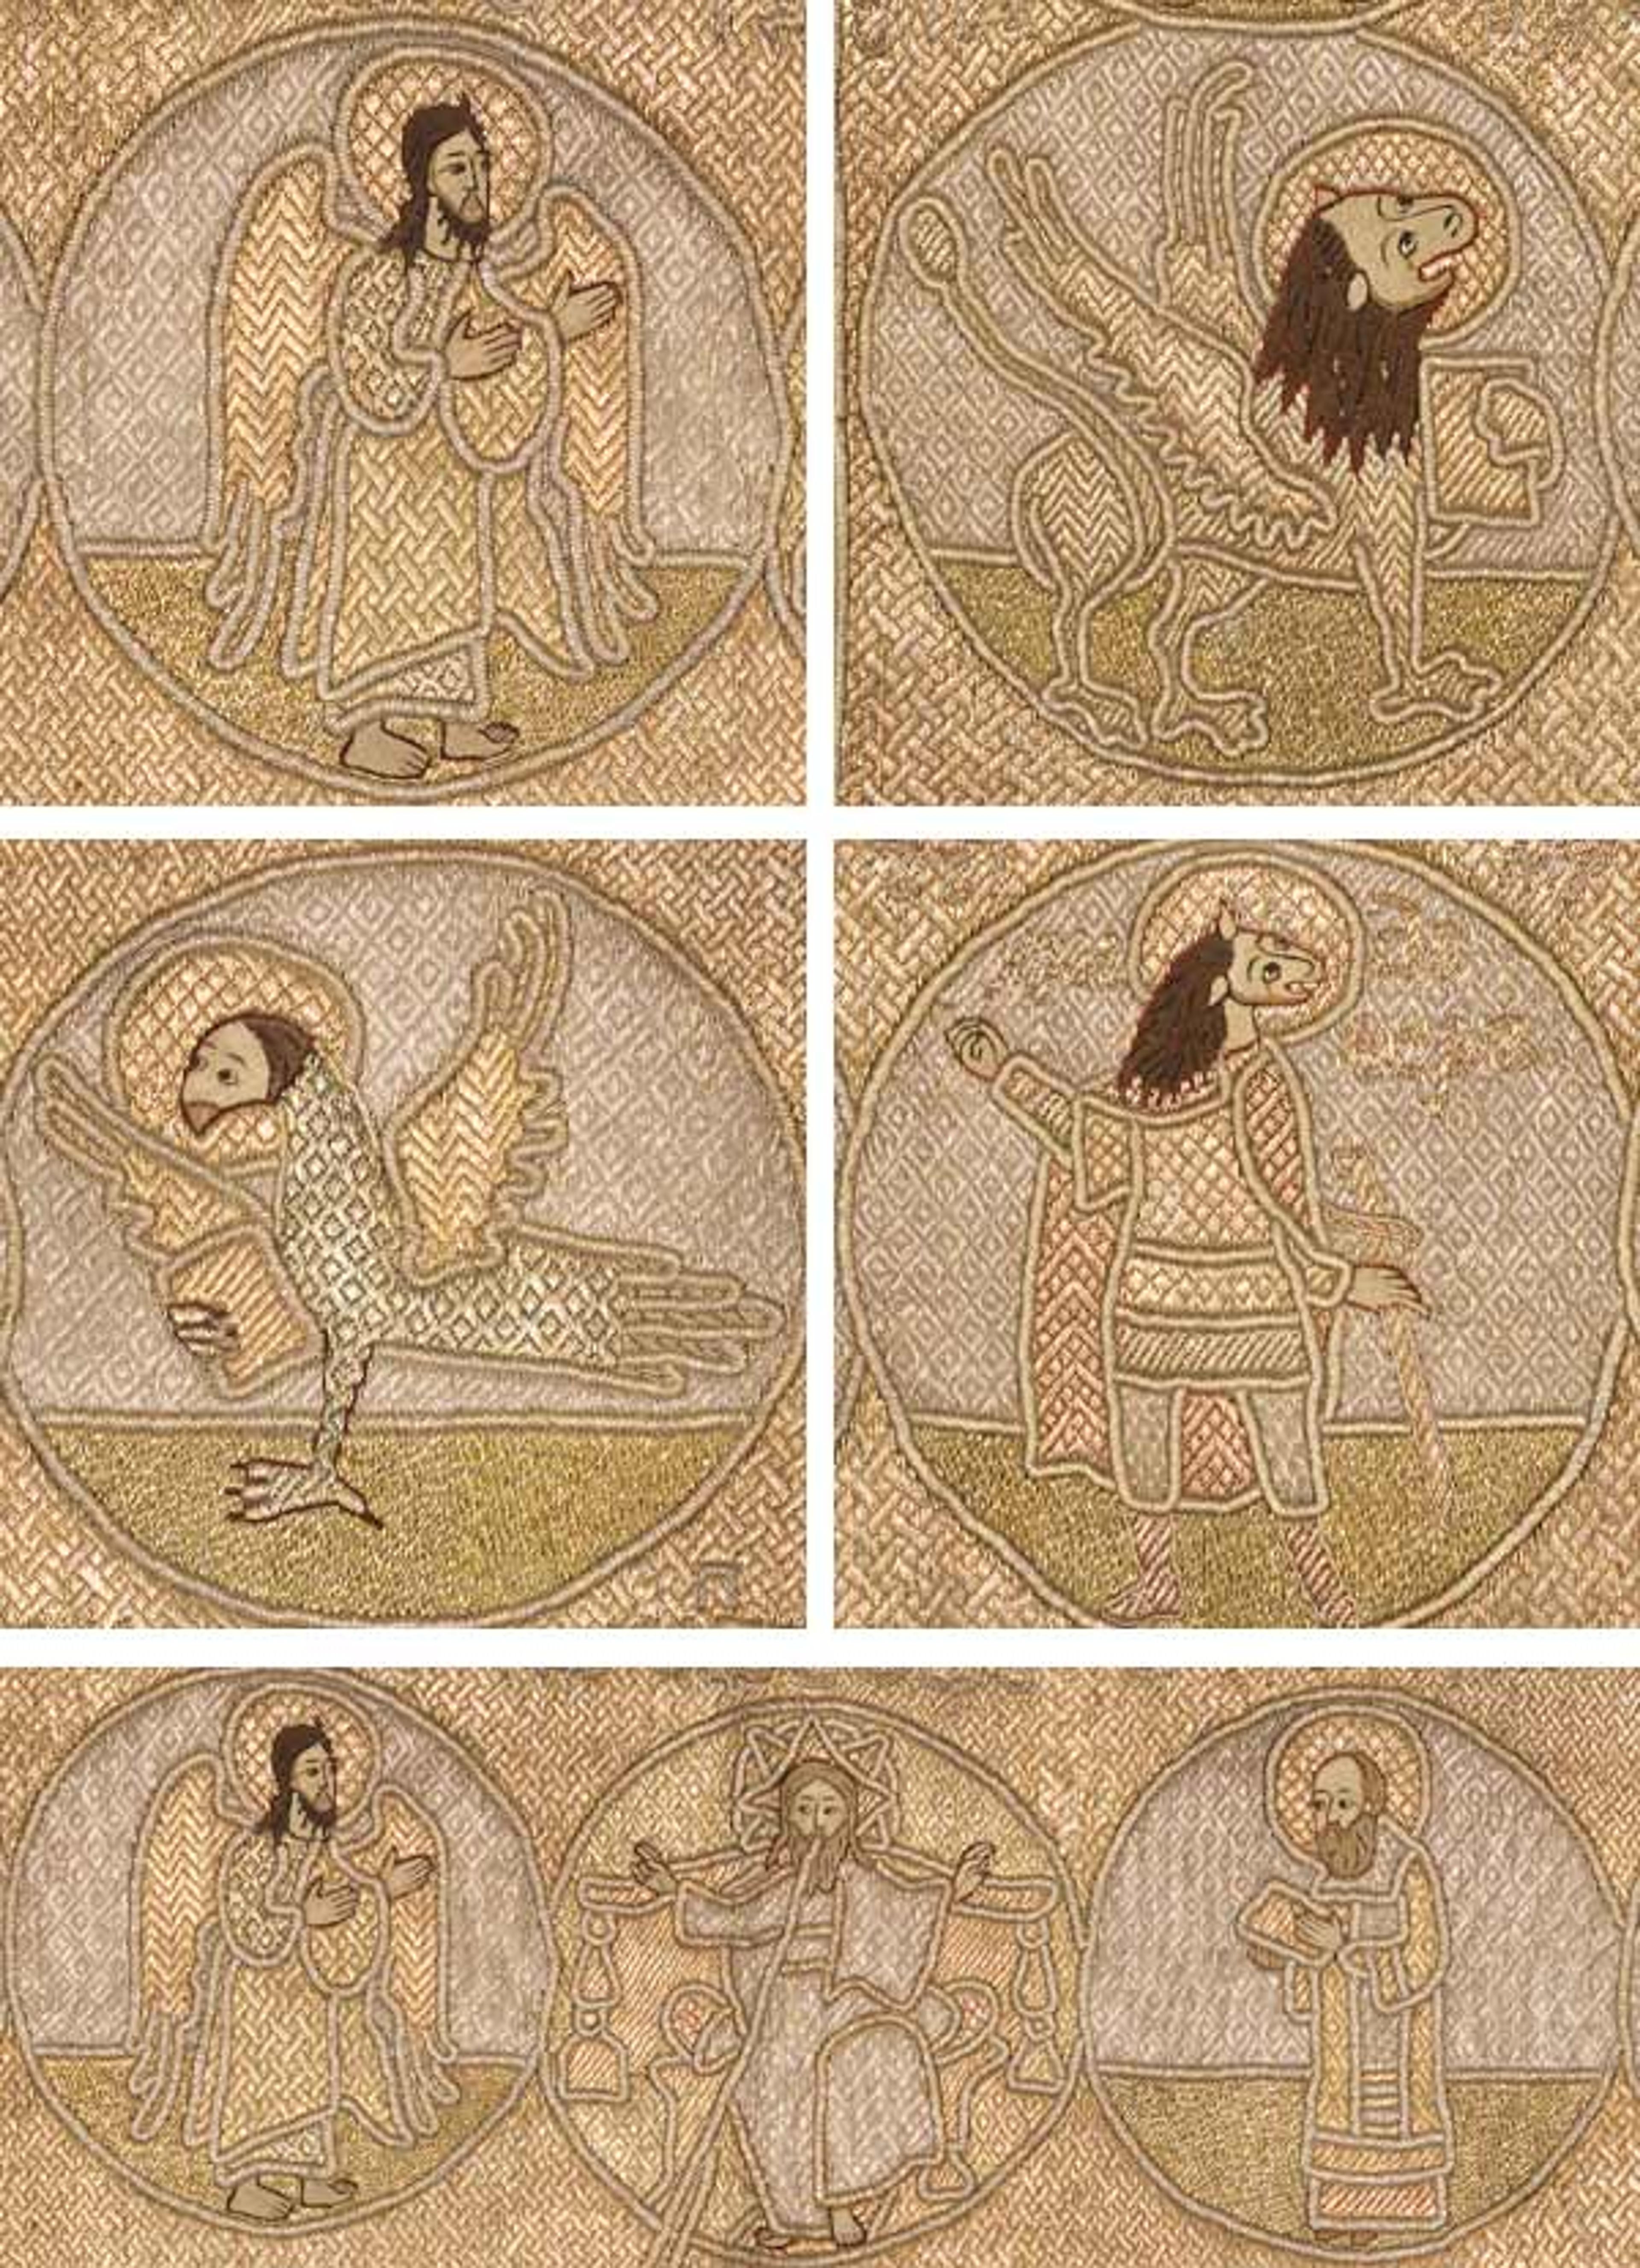 Detail views of 46.191, depicting (clockwise from top left): Saint John the Baptist, Saint John, Saint Christopher, the Lord of Hosts, and Saint Mark